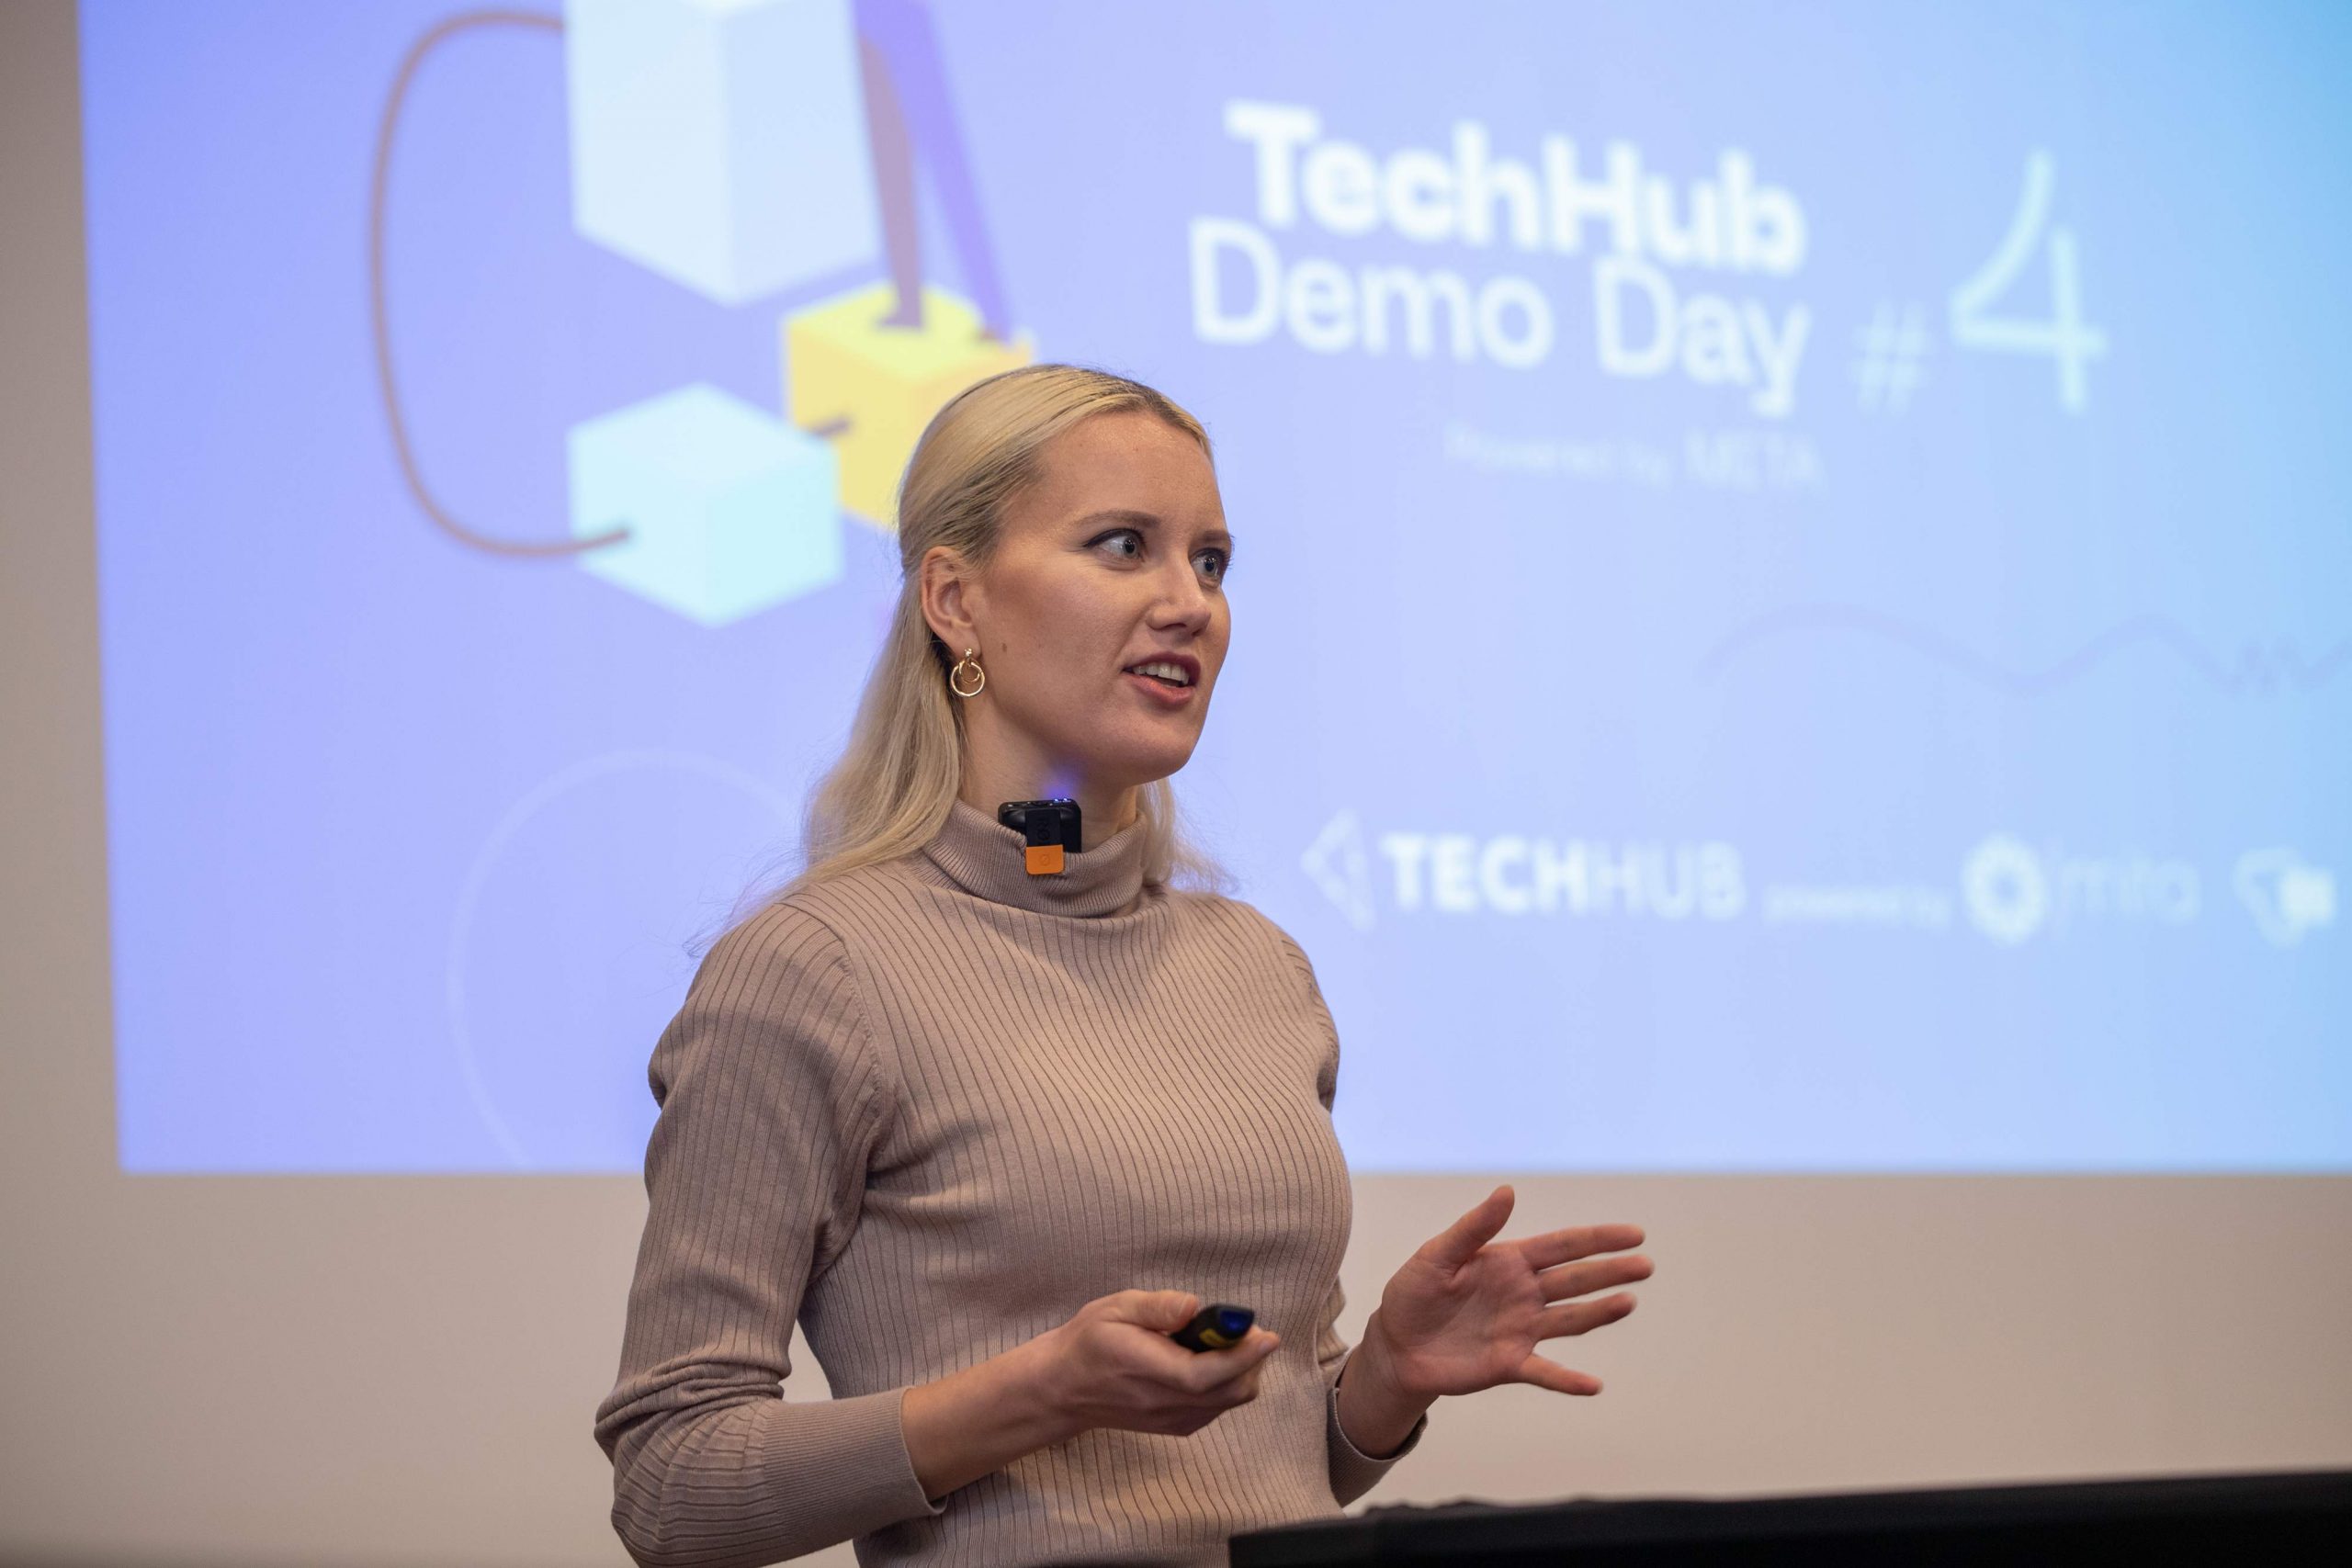 MITA Invites Startups to Apply to the 6th Cohort of the “TechHub” Pre-accelerator